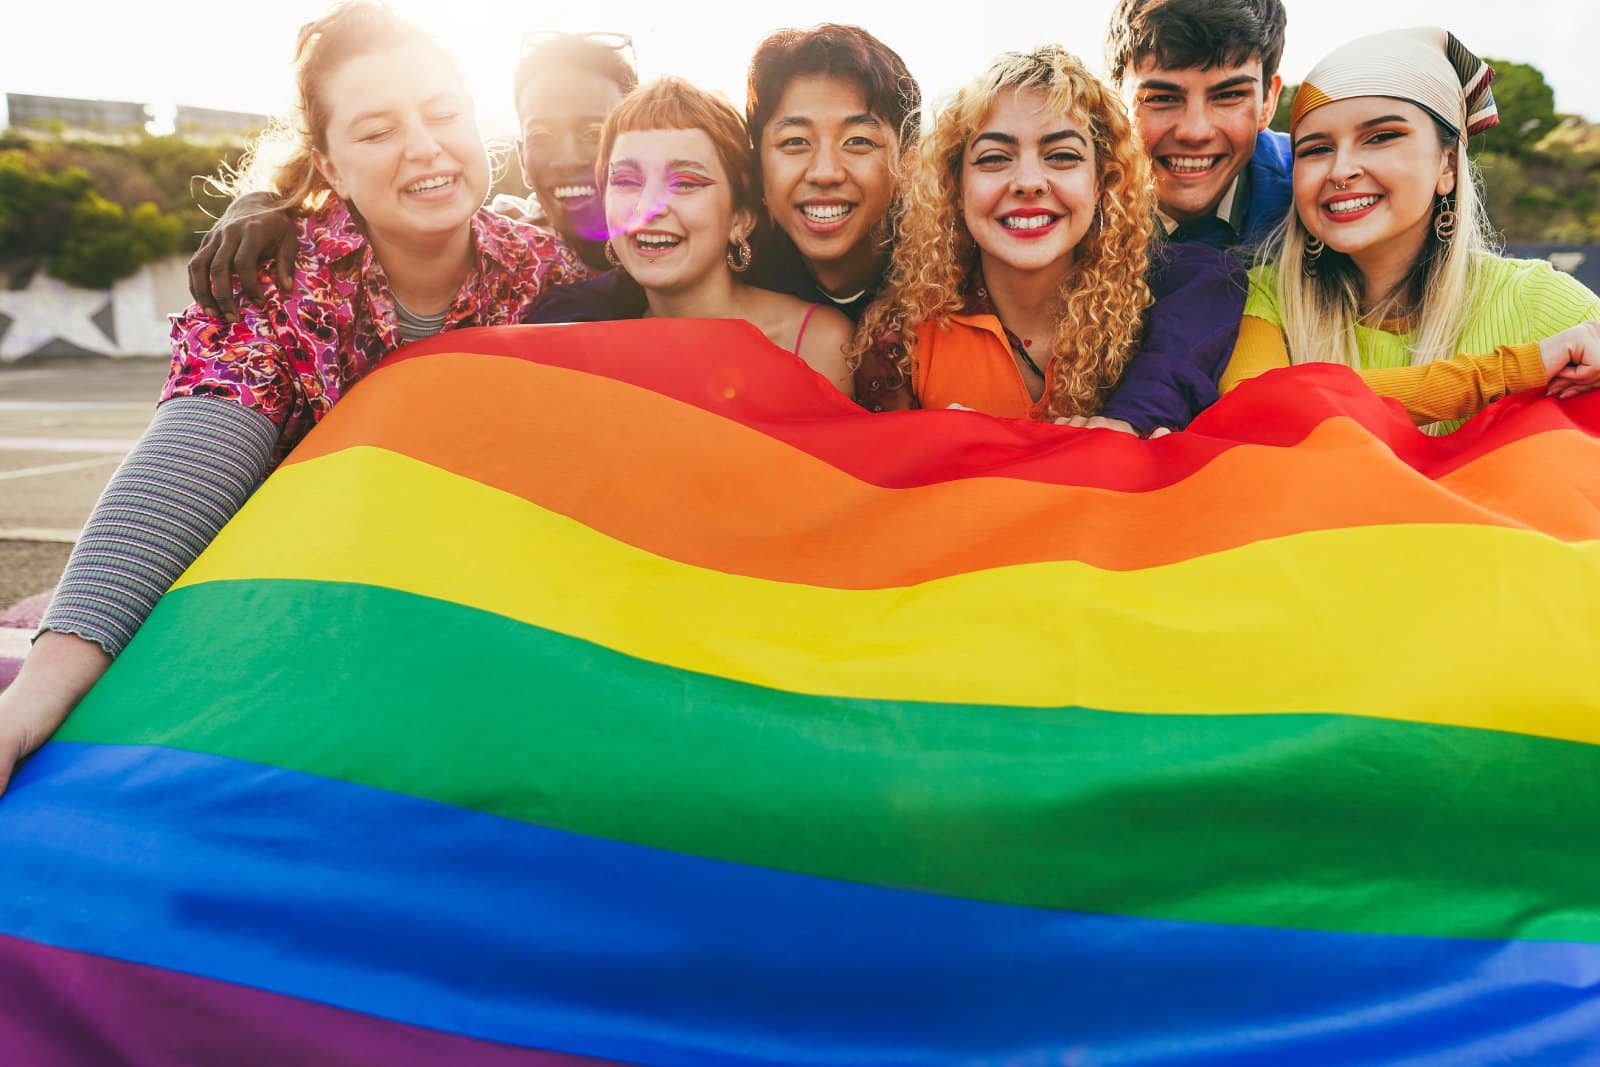 <p class="wp-caption-text">Image Credit: Shutterstock / Tint Media</p>  <p><span>Asking locals about LGBTQ+ friendly spaces without actually coming out can feel like navigating a verbal obstacle course. It’s all about asking the right questions without really asking them.</span></p>